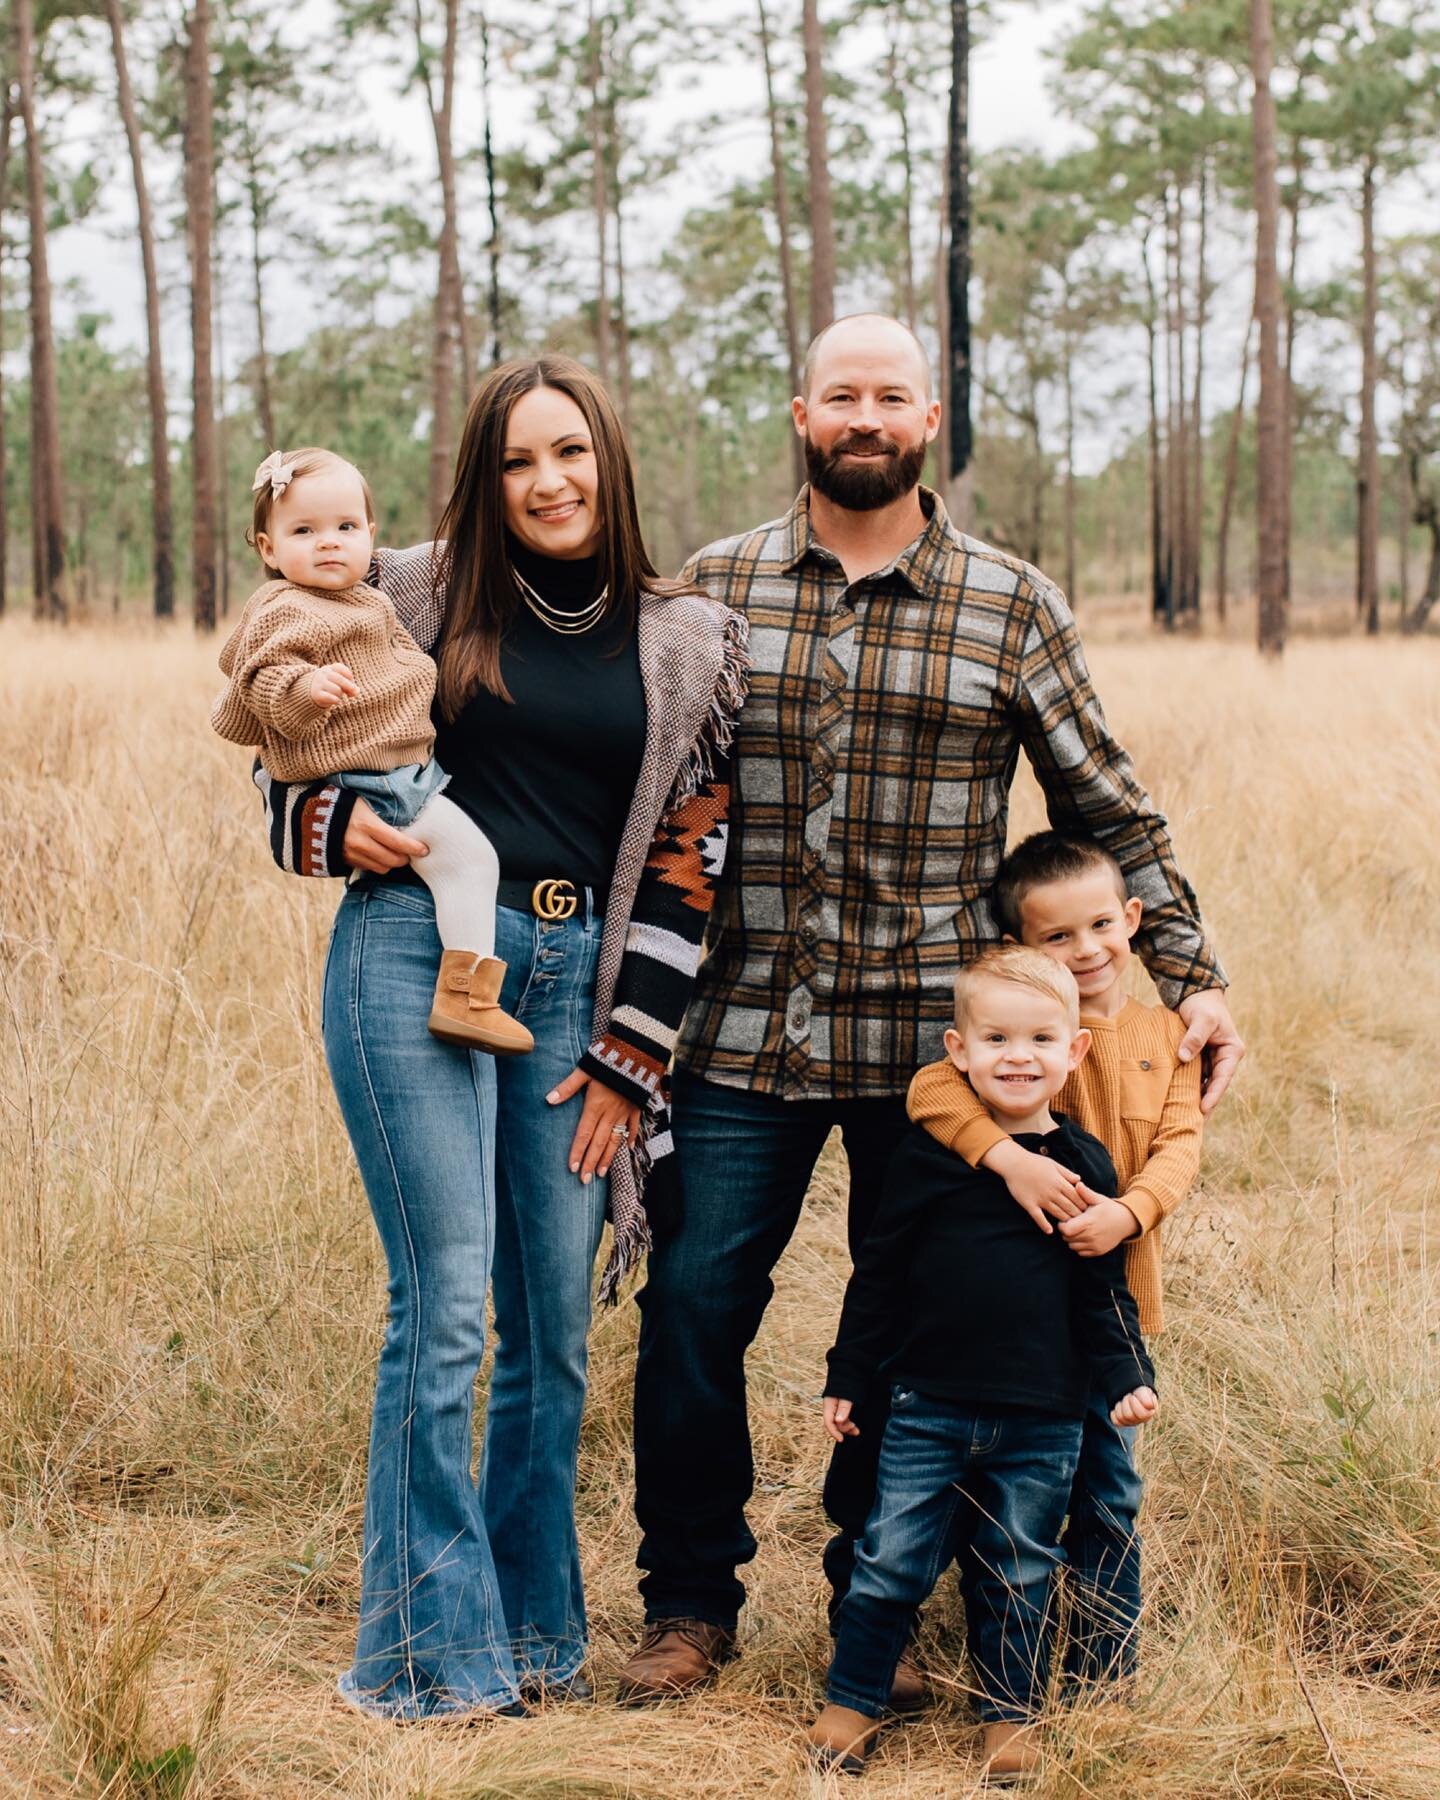 The sweetest family ever! We met at wekiva springs state park for some family photos and to document their daughter turning one! It was an overcast, cool January afternoon. The colors she picked for her family were the perfect compliment to this loca